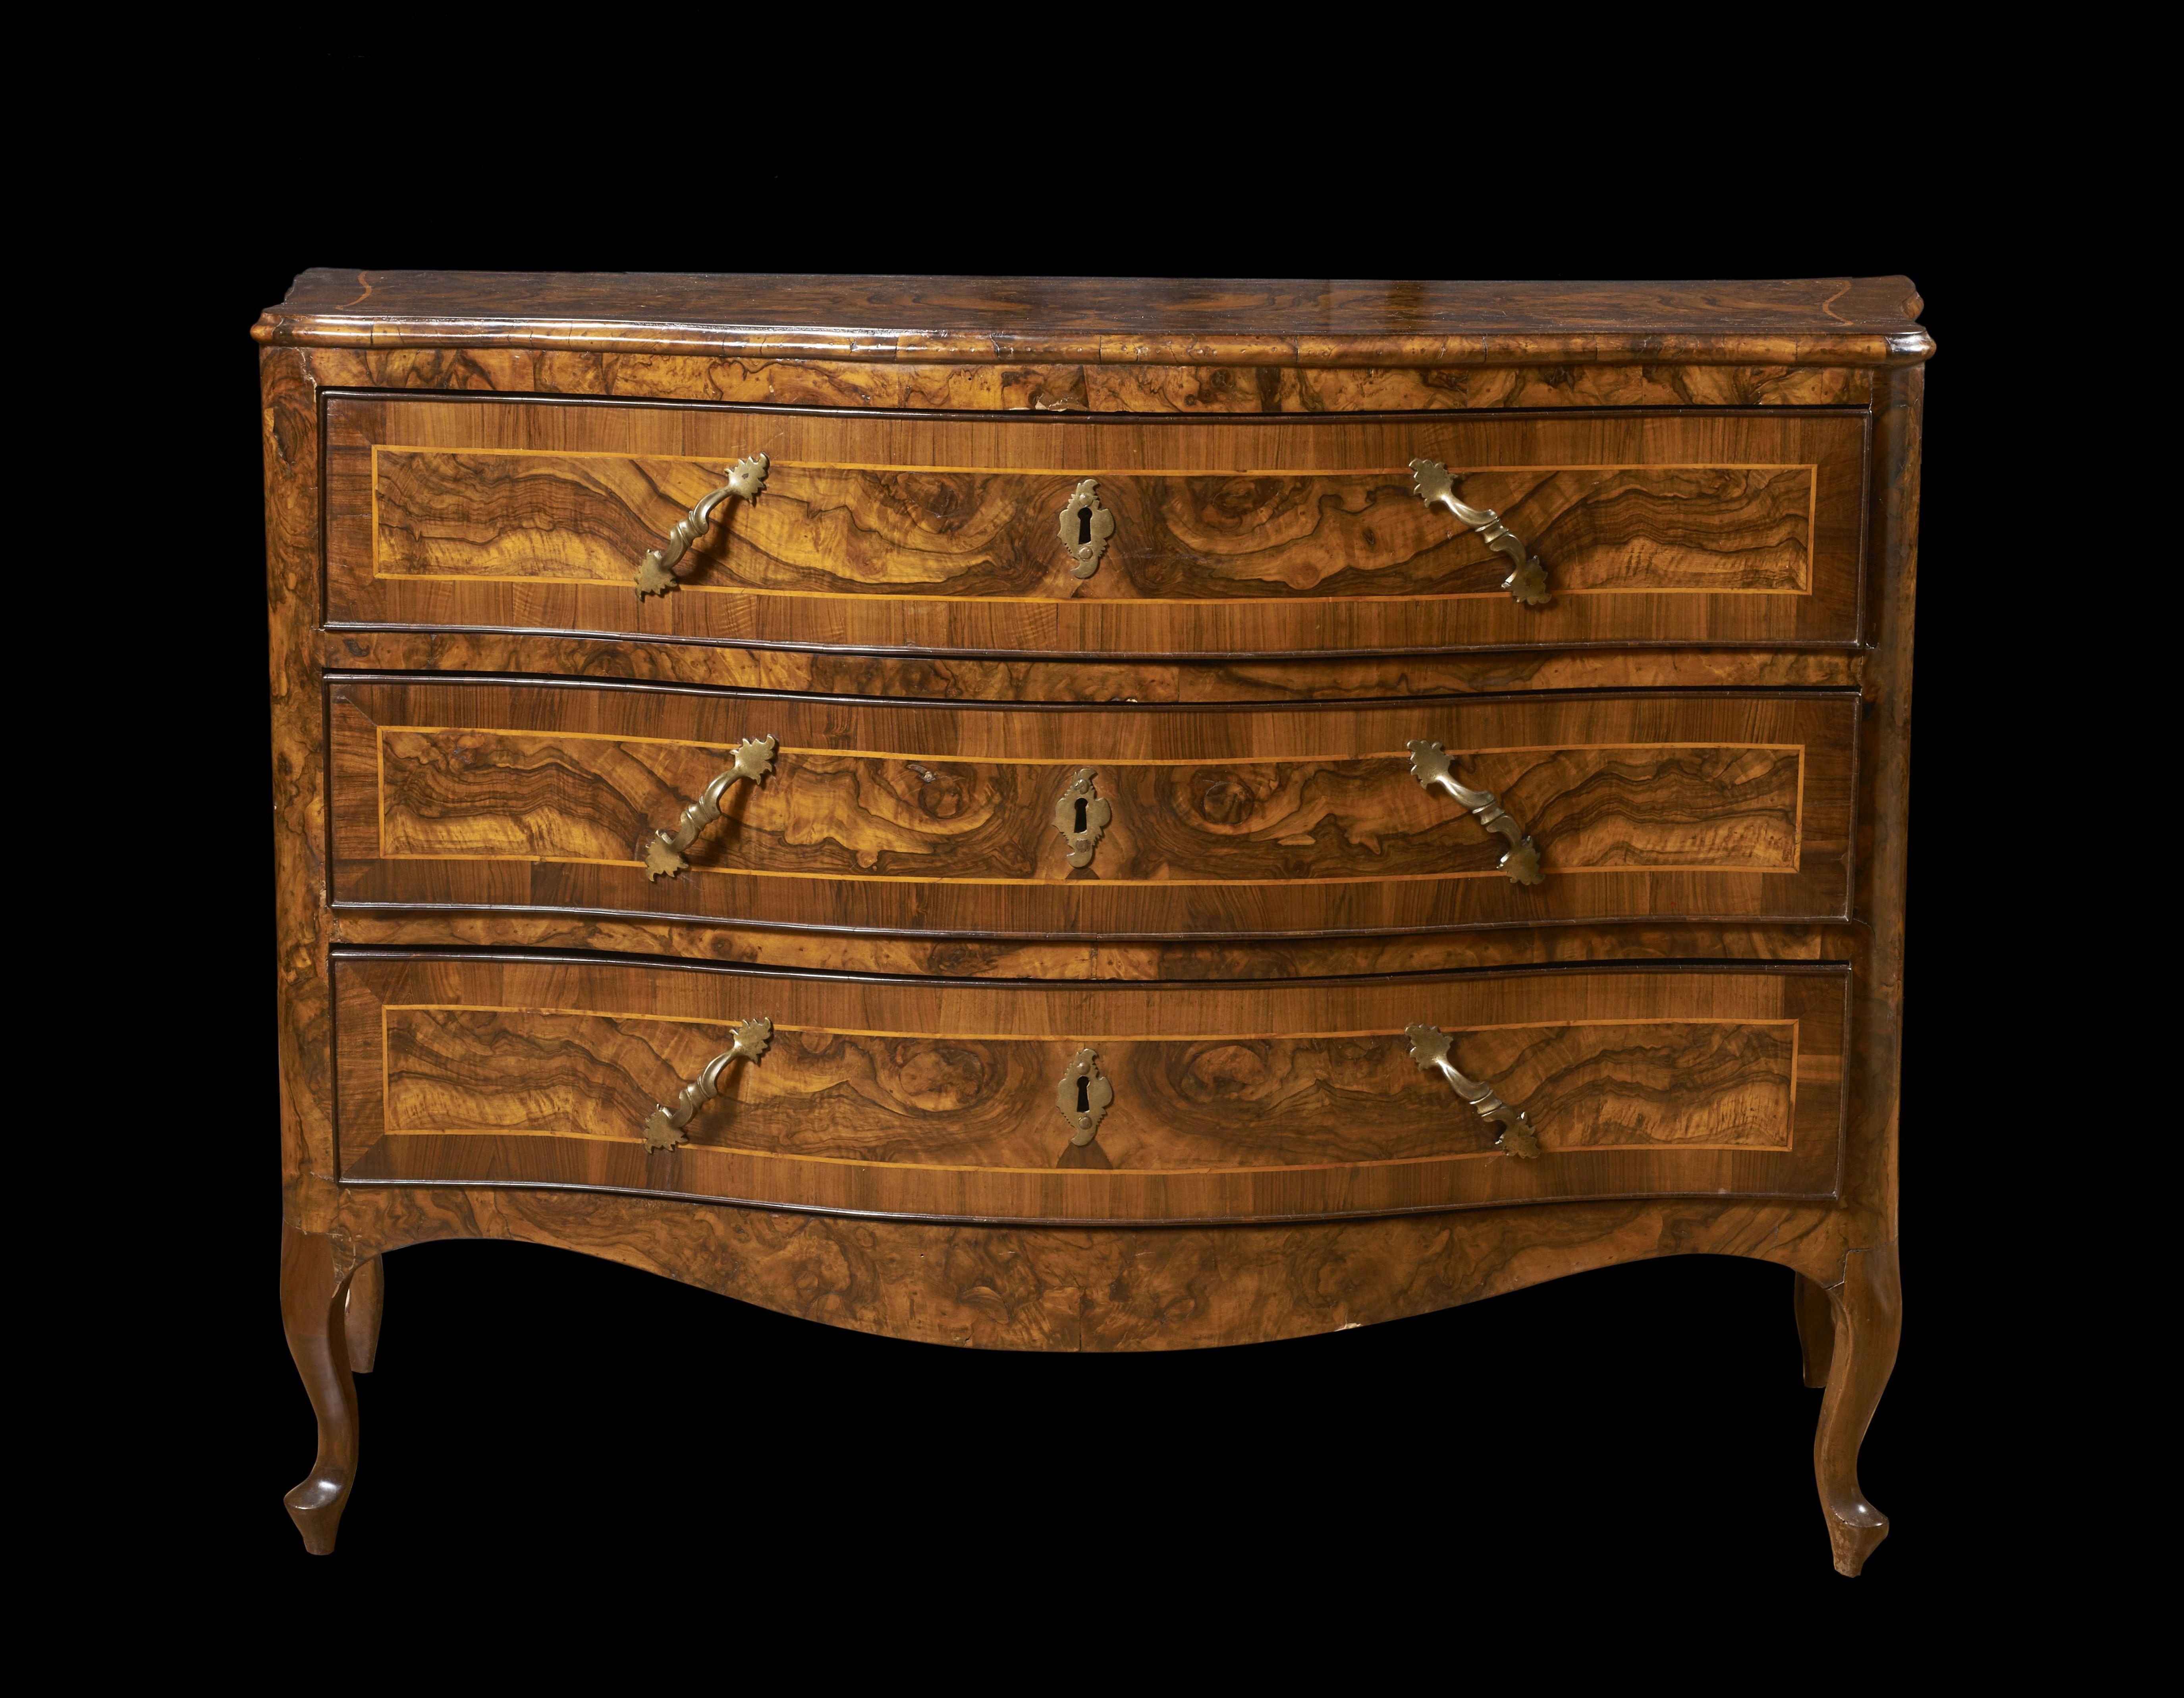 Rare Italian Louis XV chest of drawers in walnut, walnut briar and centrally moved fillets with high leg measuring 90 x 116 x 58 cm.

This beautiful chest of drawers with 3 drawers moved centrally and slightly rounded on the sides rests on legs,